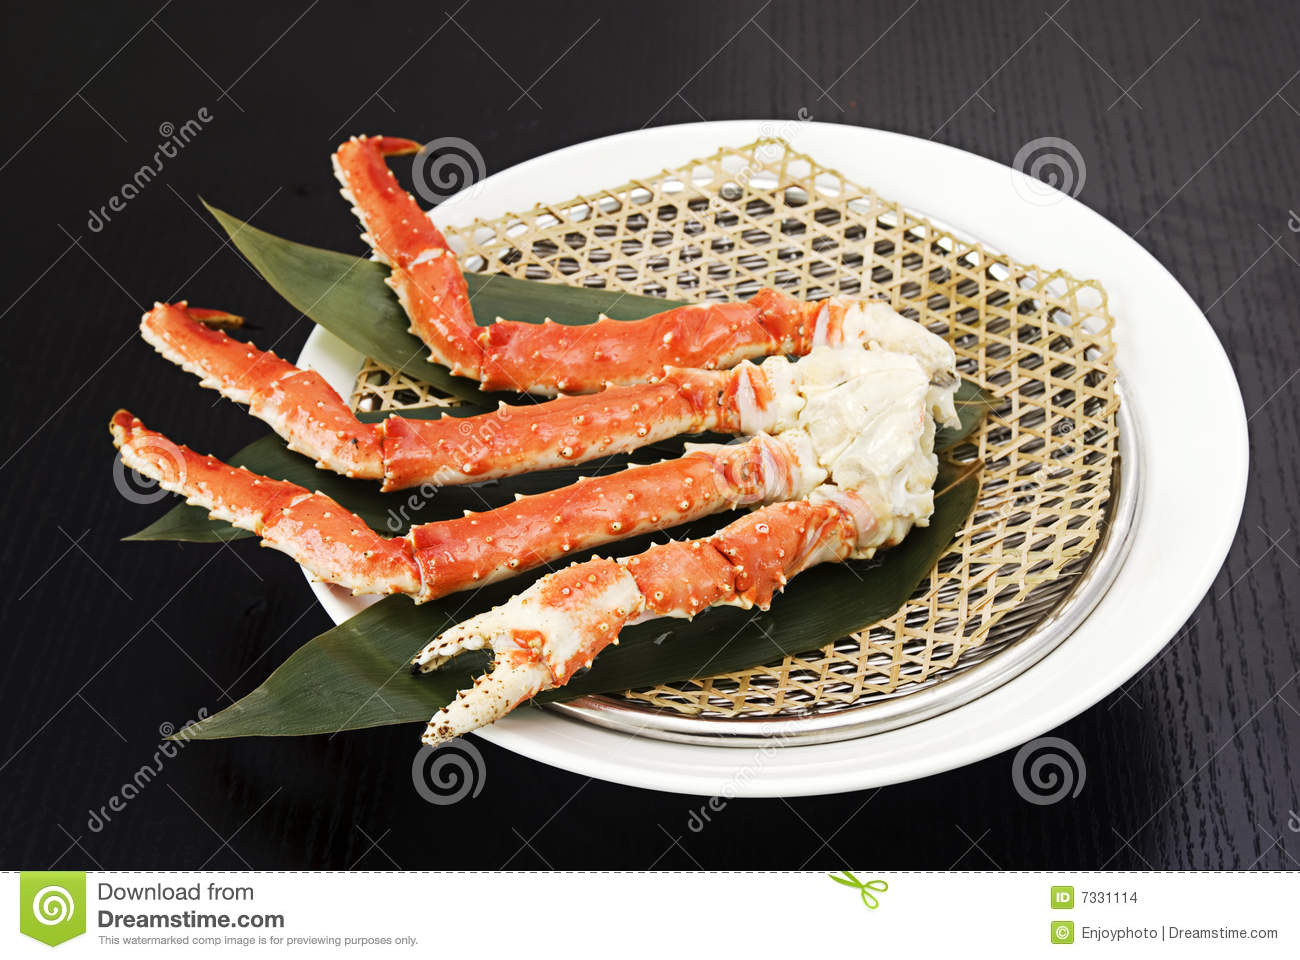 Crab Legs Over The Plate